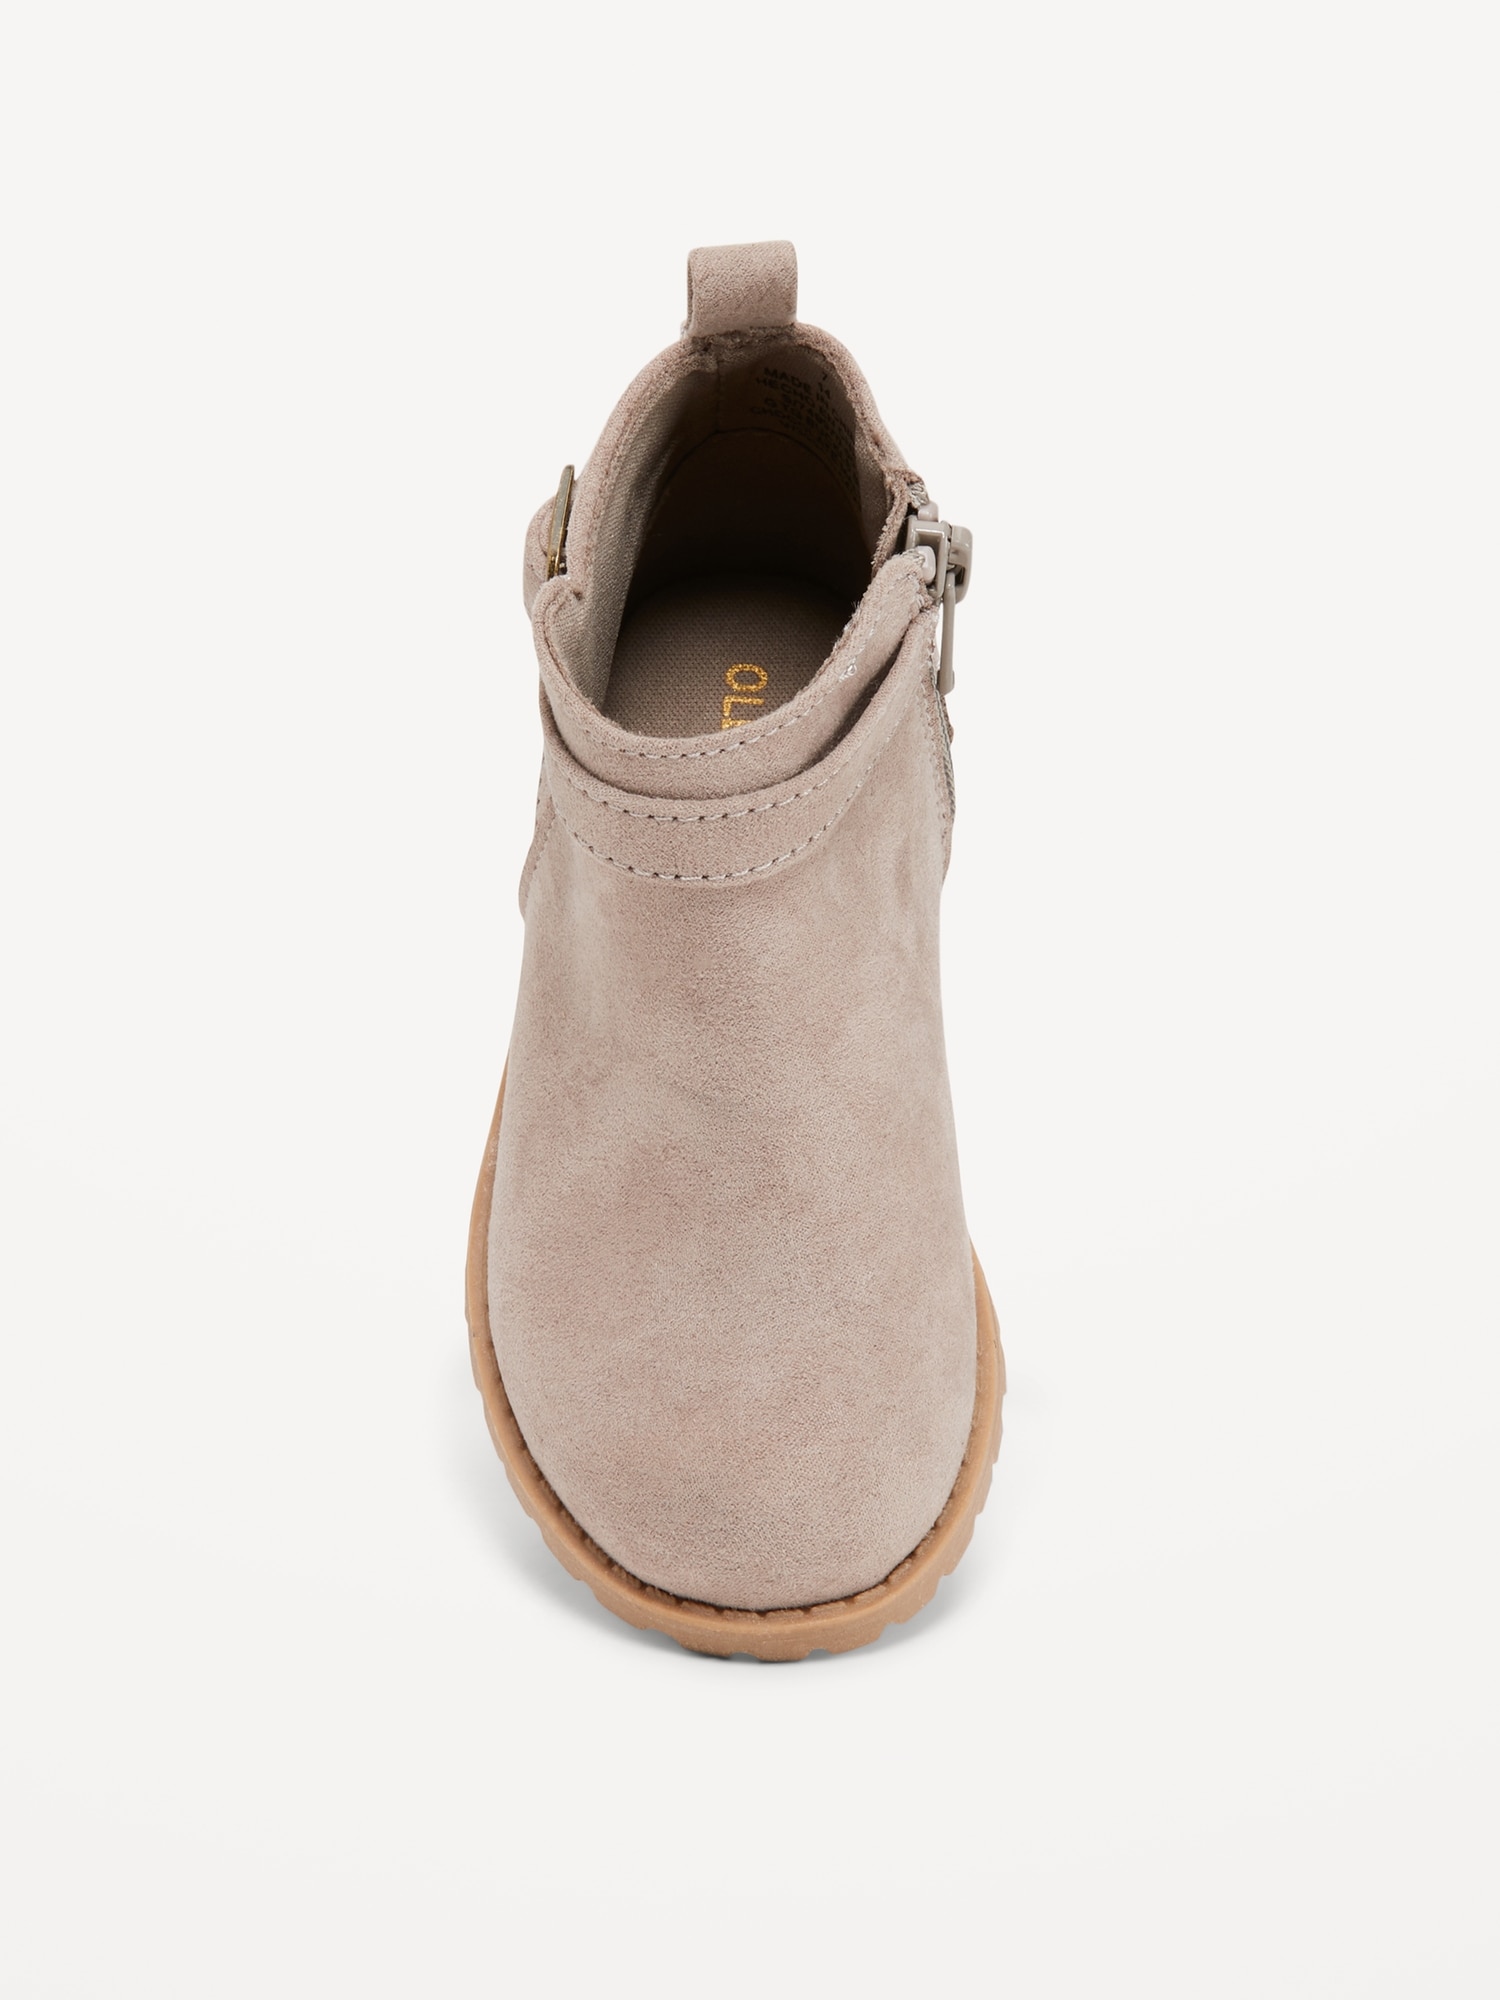 Faux-Suede Buckled Side-Zip Bootie for Toddler Girls | Old Navy